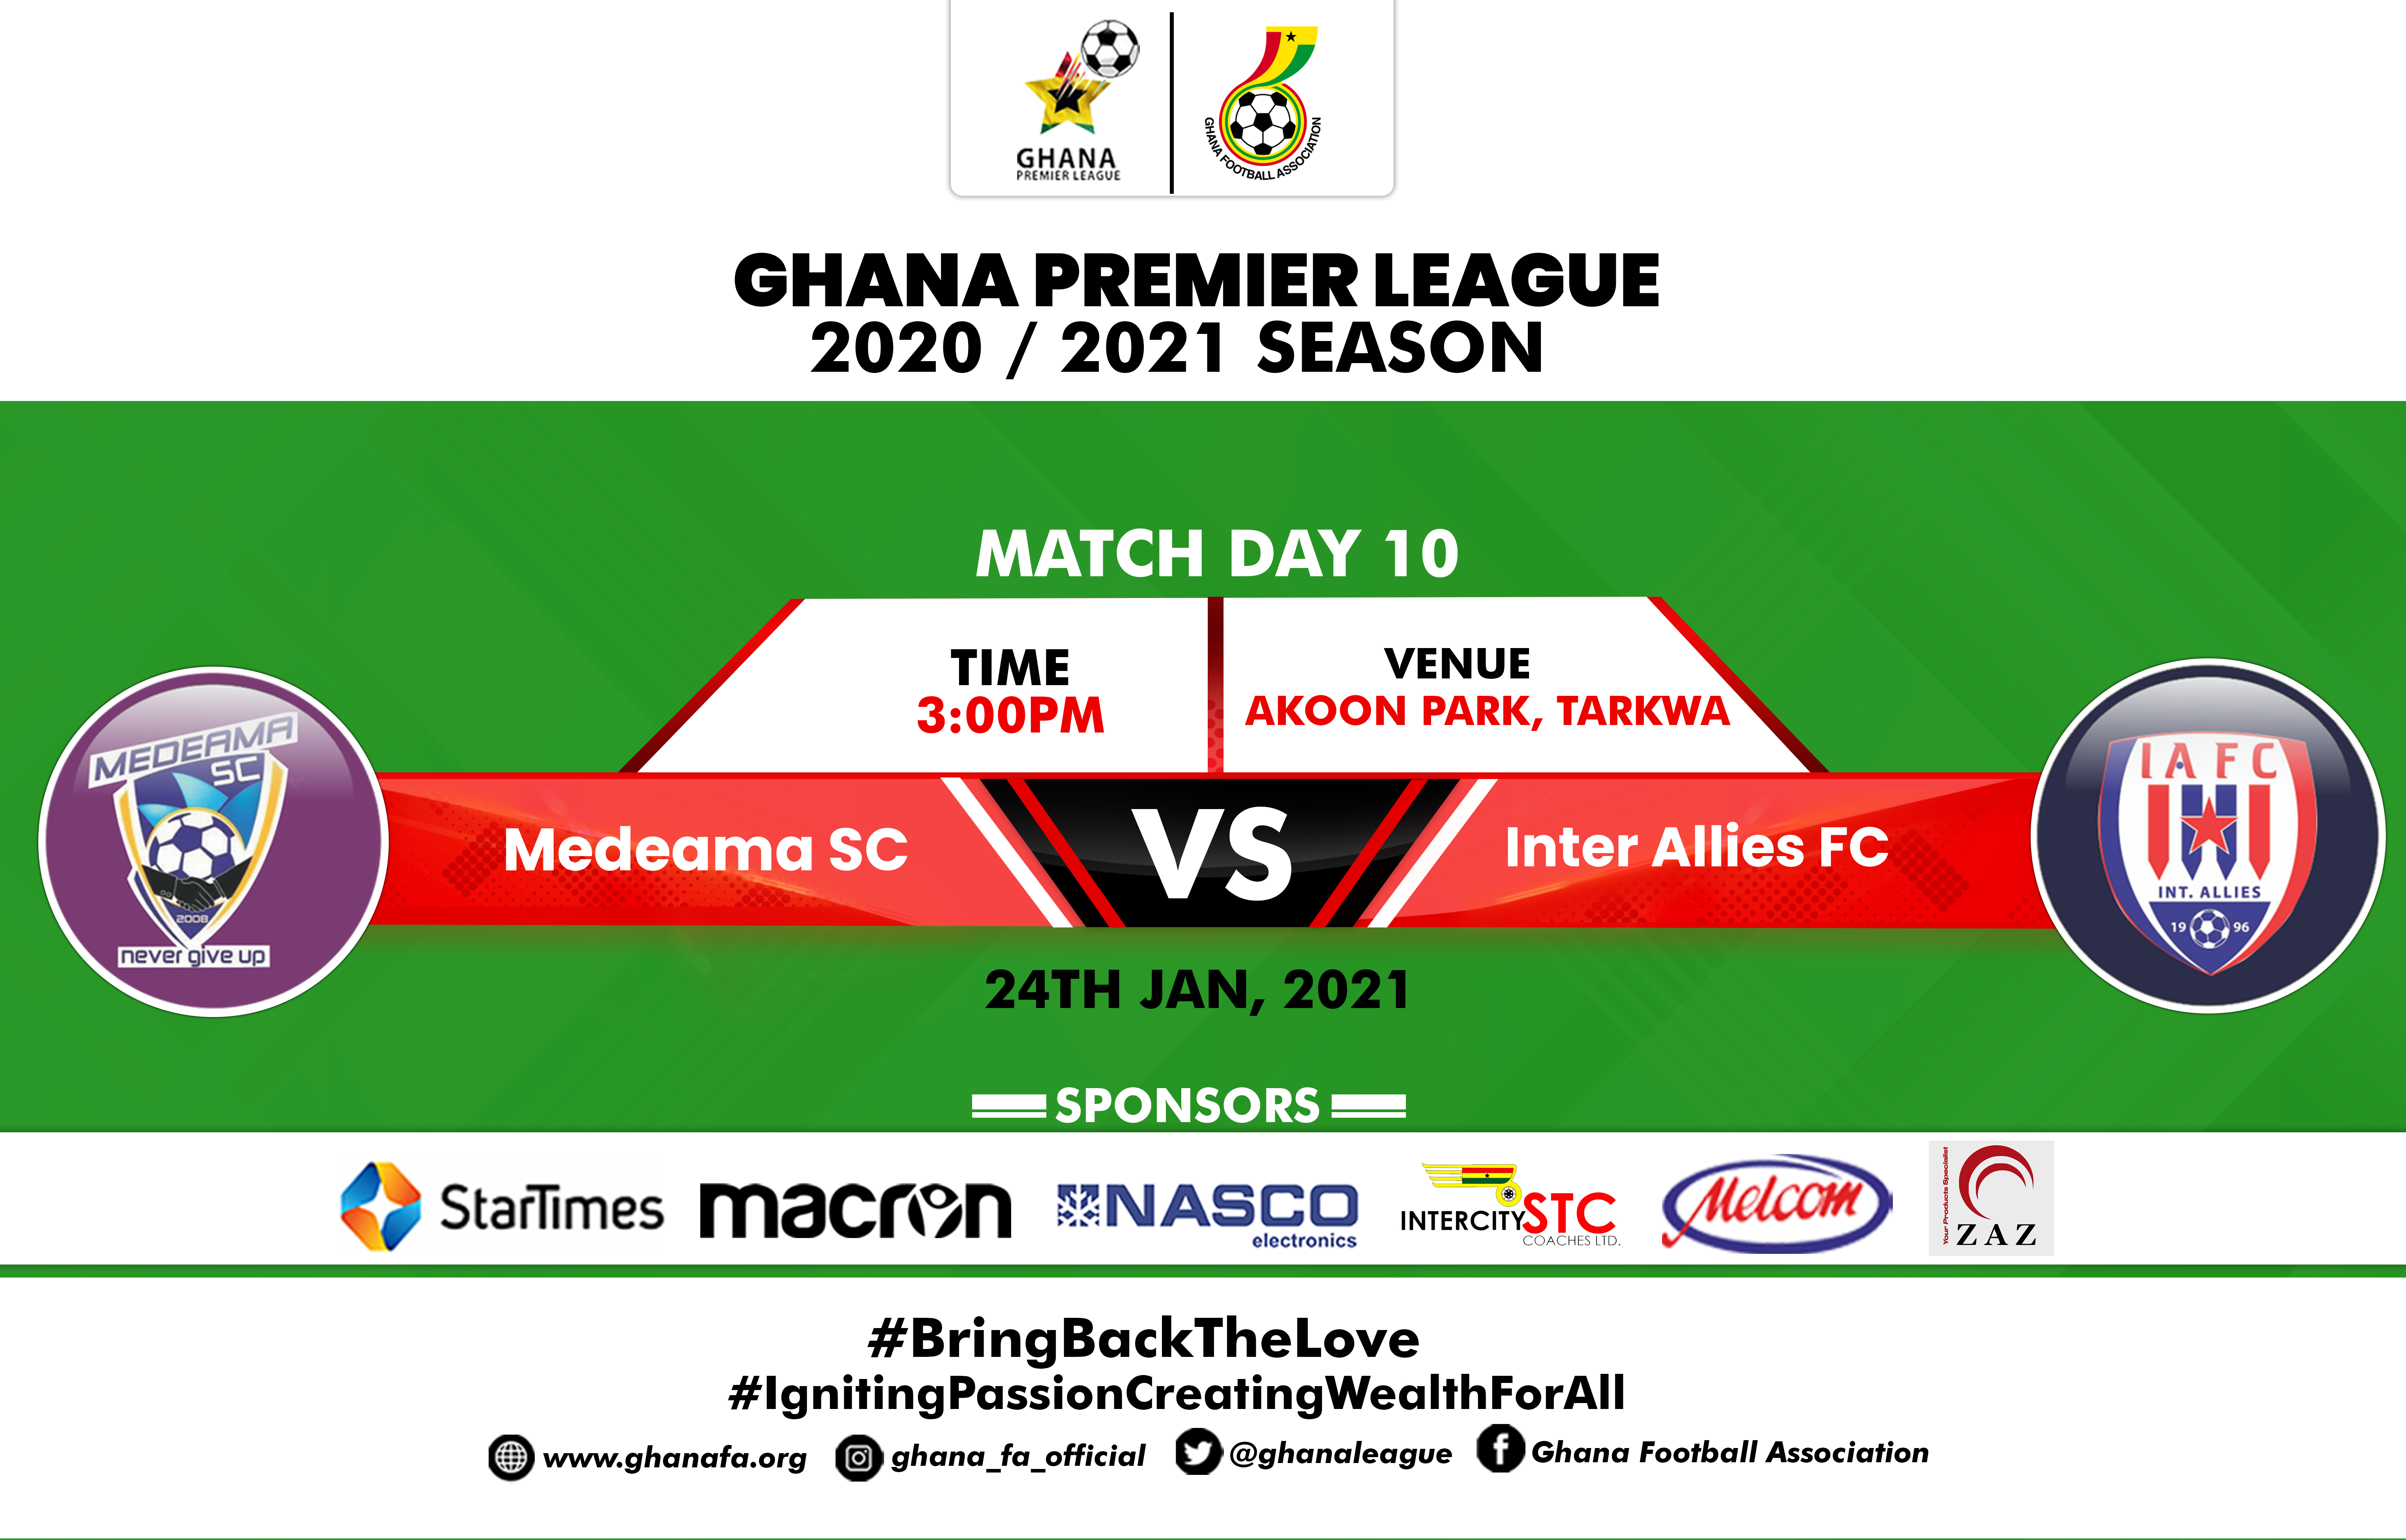 Lowly placed Inter Allies trek to Tarkwa to face rapacious Medeama SC - Preview